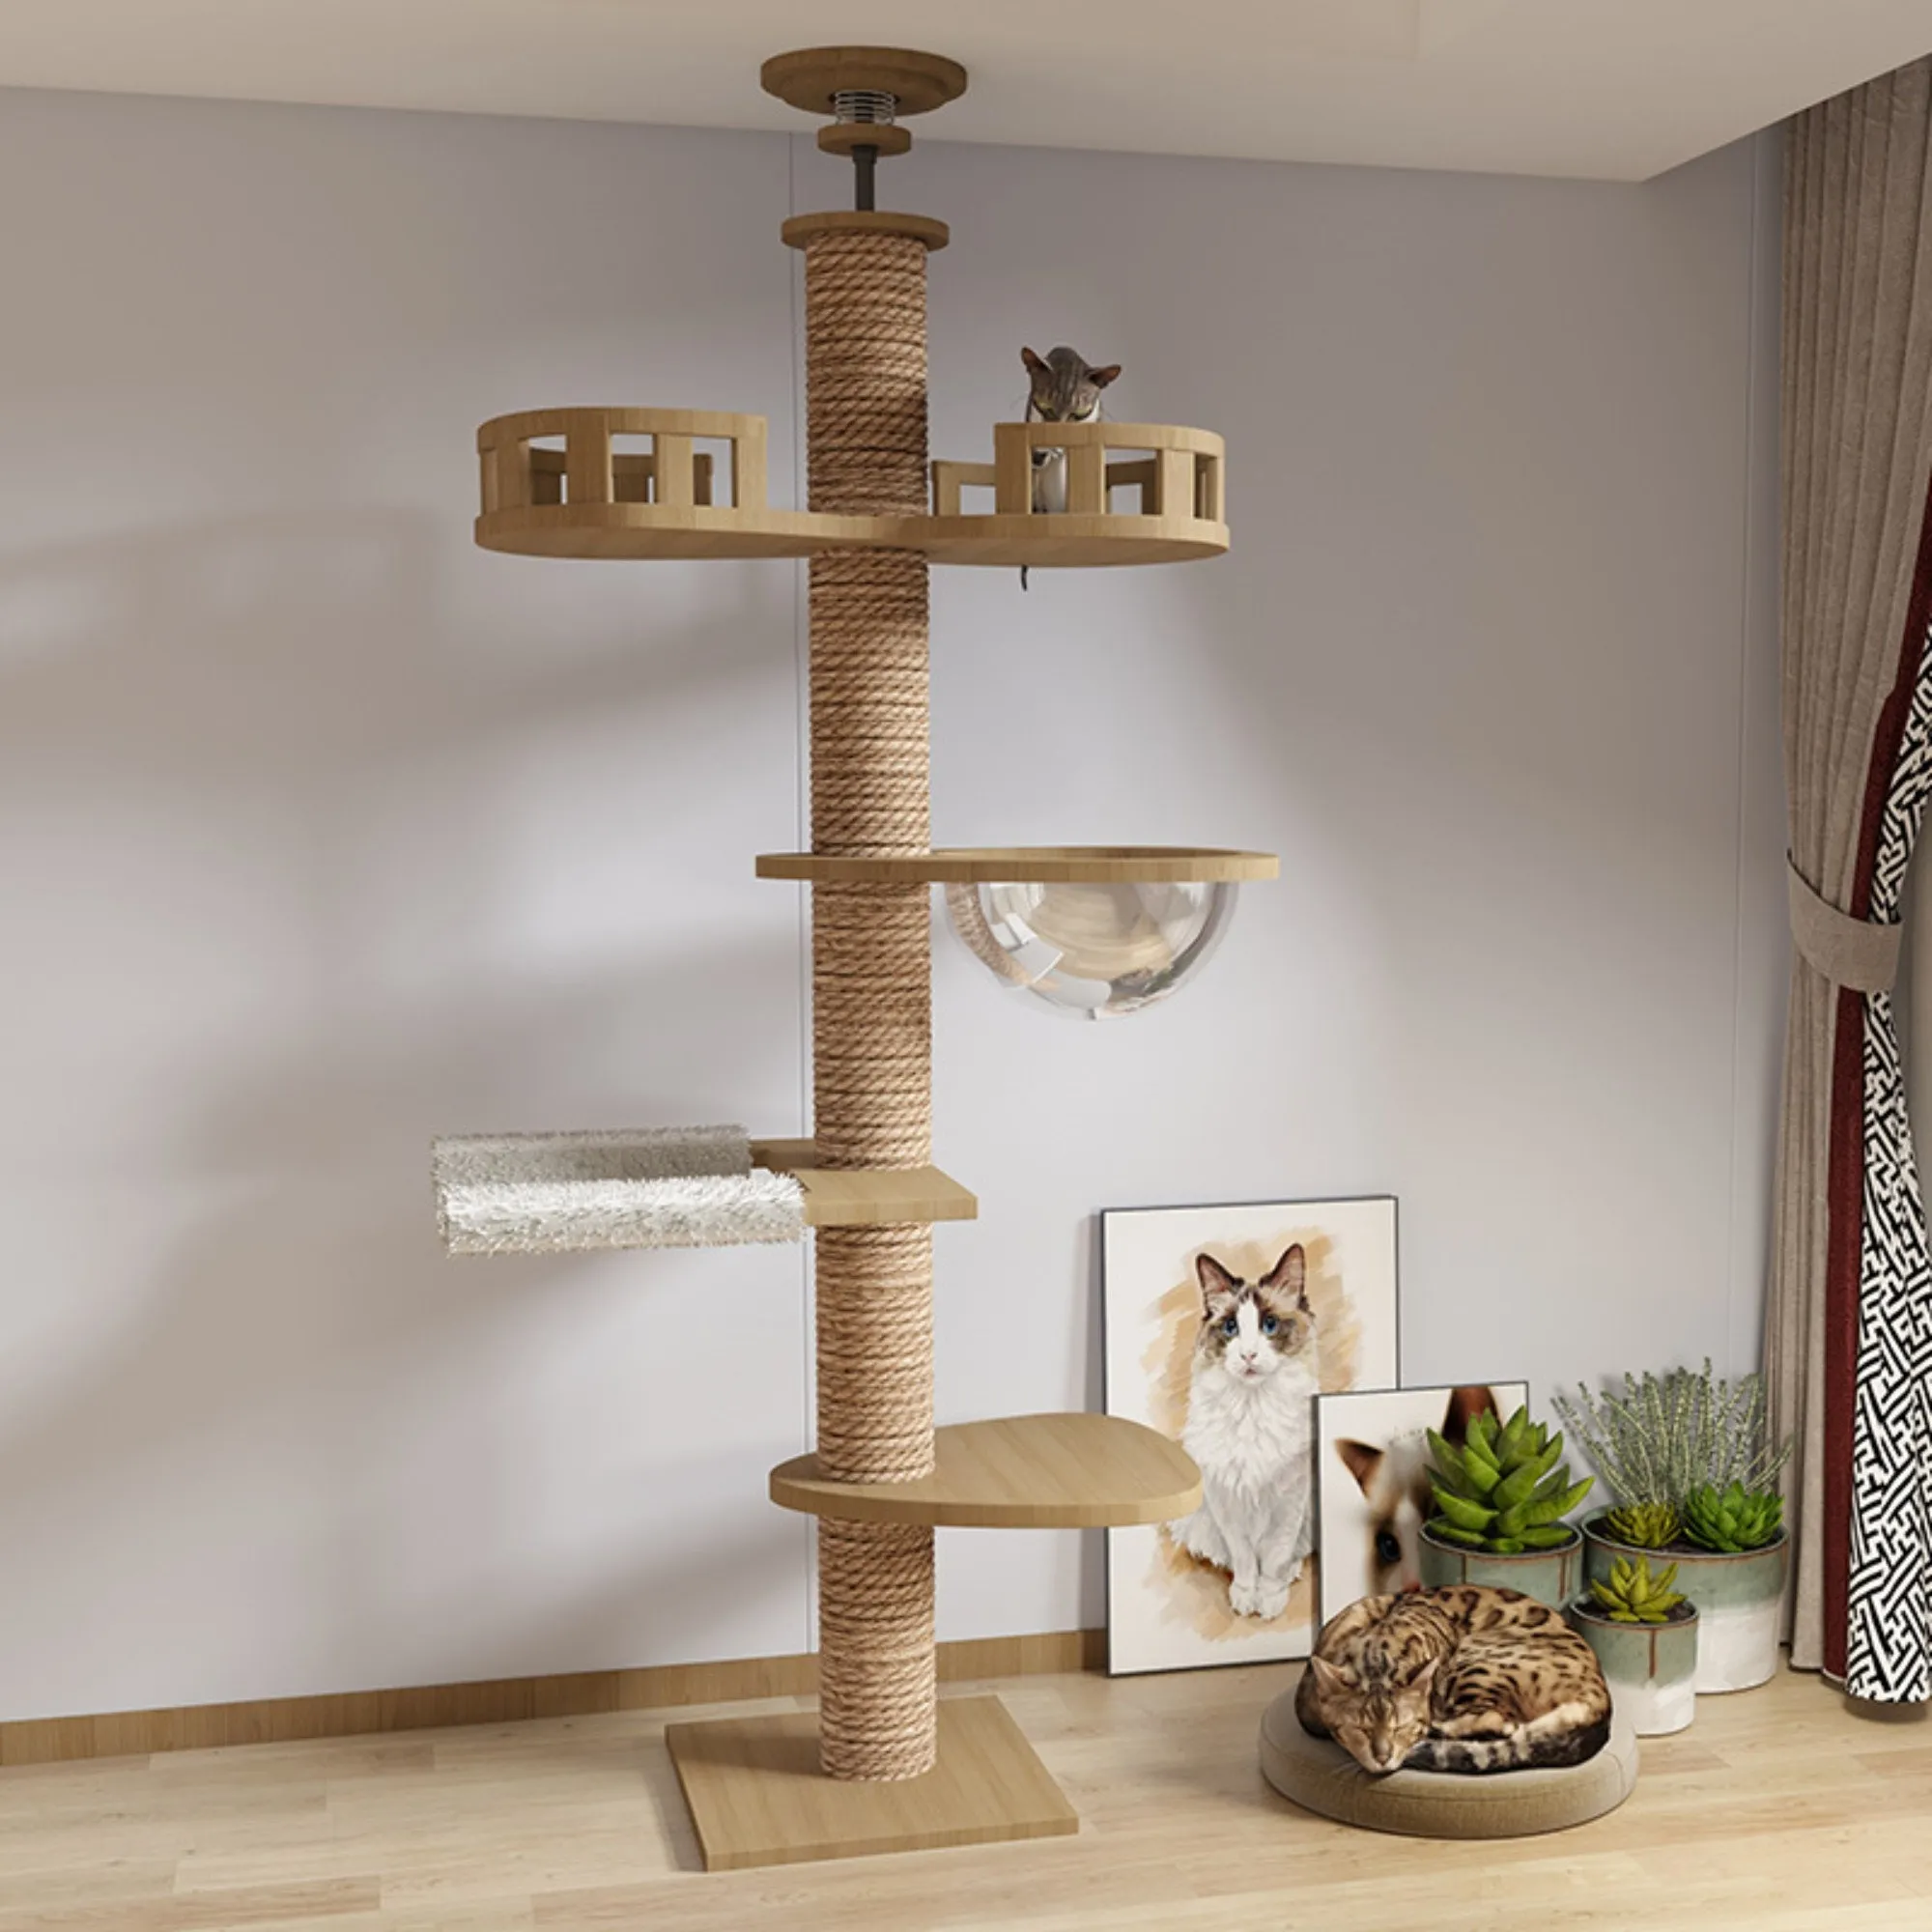 Cat Tree Floor to Ceiling 5-tier Tower Cat Climbing Wooden Frame Tree Adjustable Height Cat Tree Ceiling